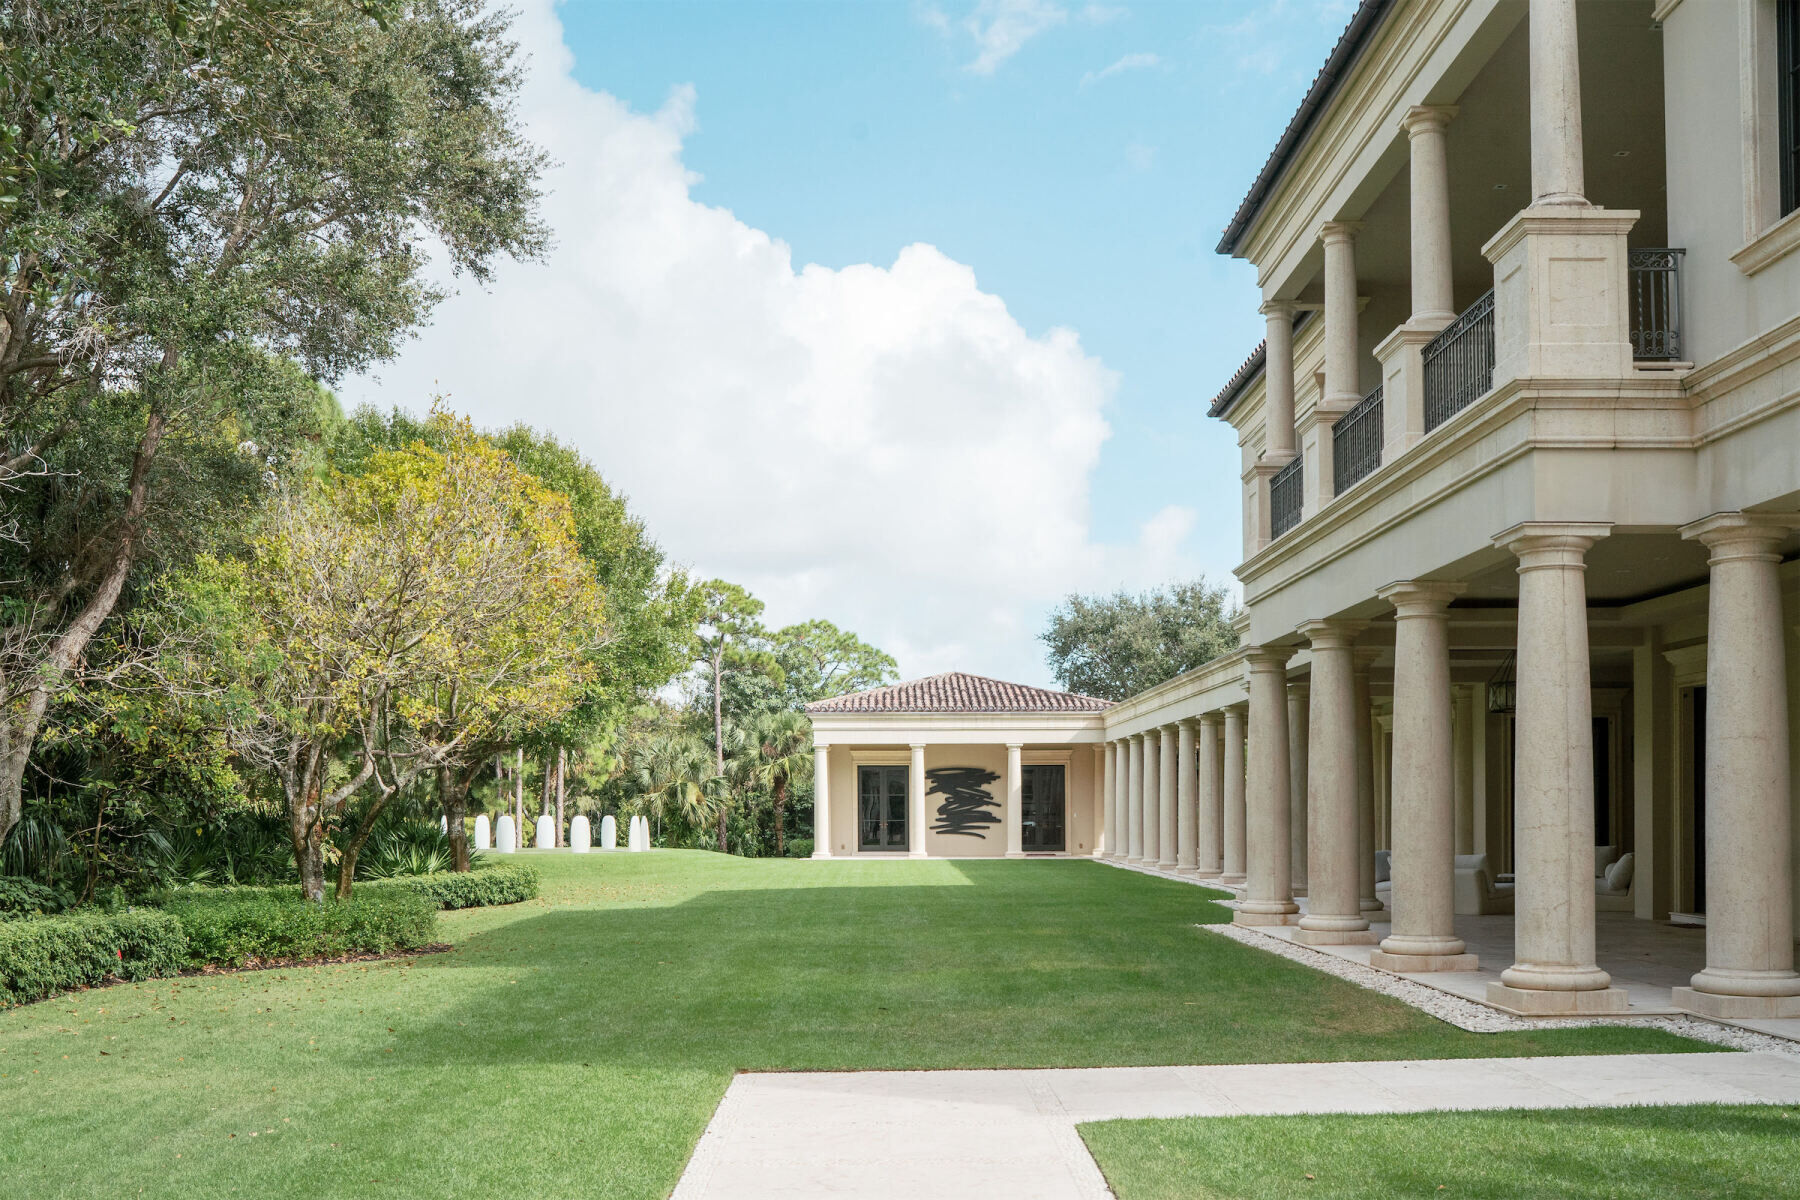 A facade and lawn of the Norton Museum of Art in Palm Beach, Florida.